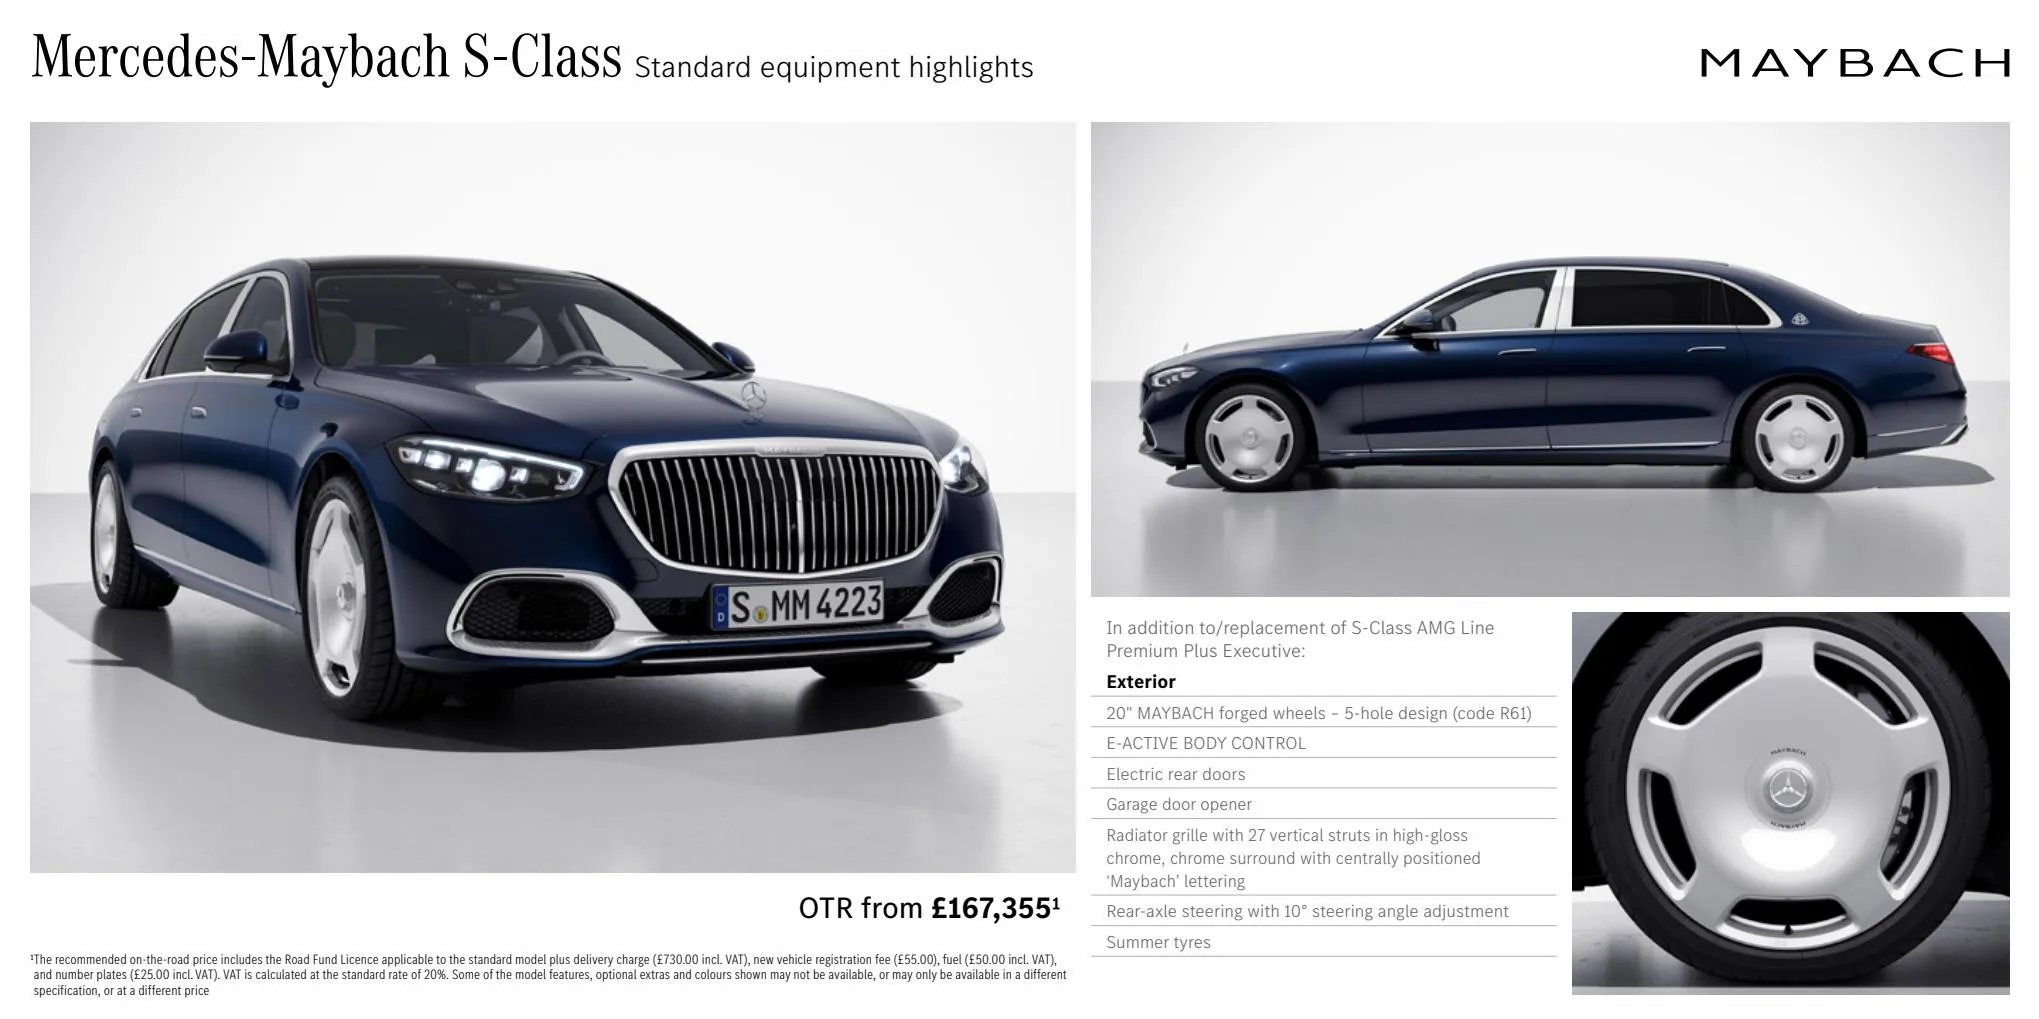 Catalogue The S-Class and Mercedes-Maybach S-Class, page 00032